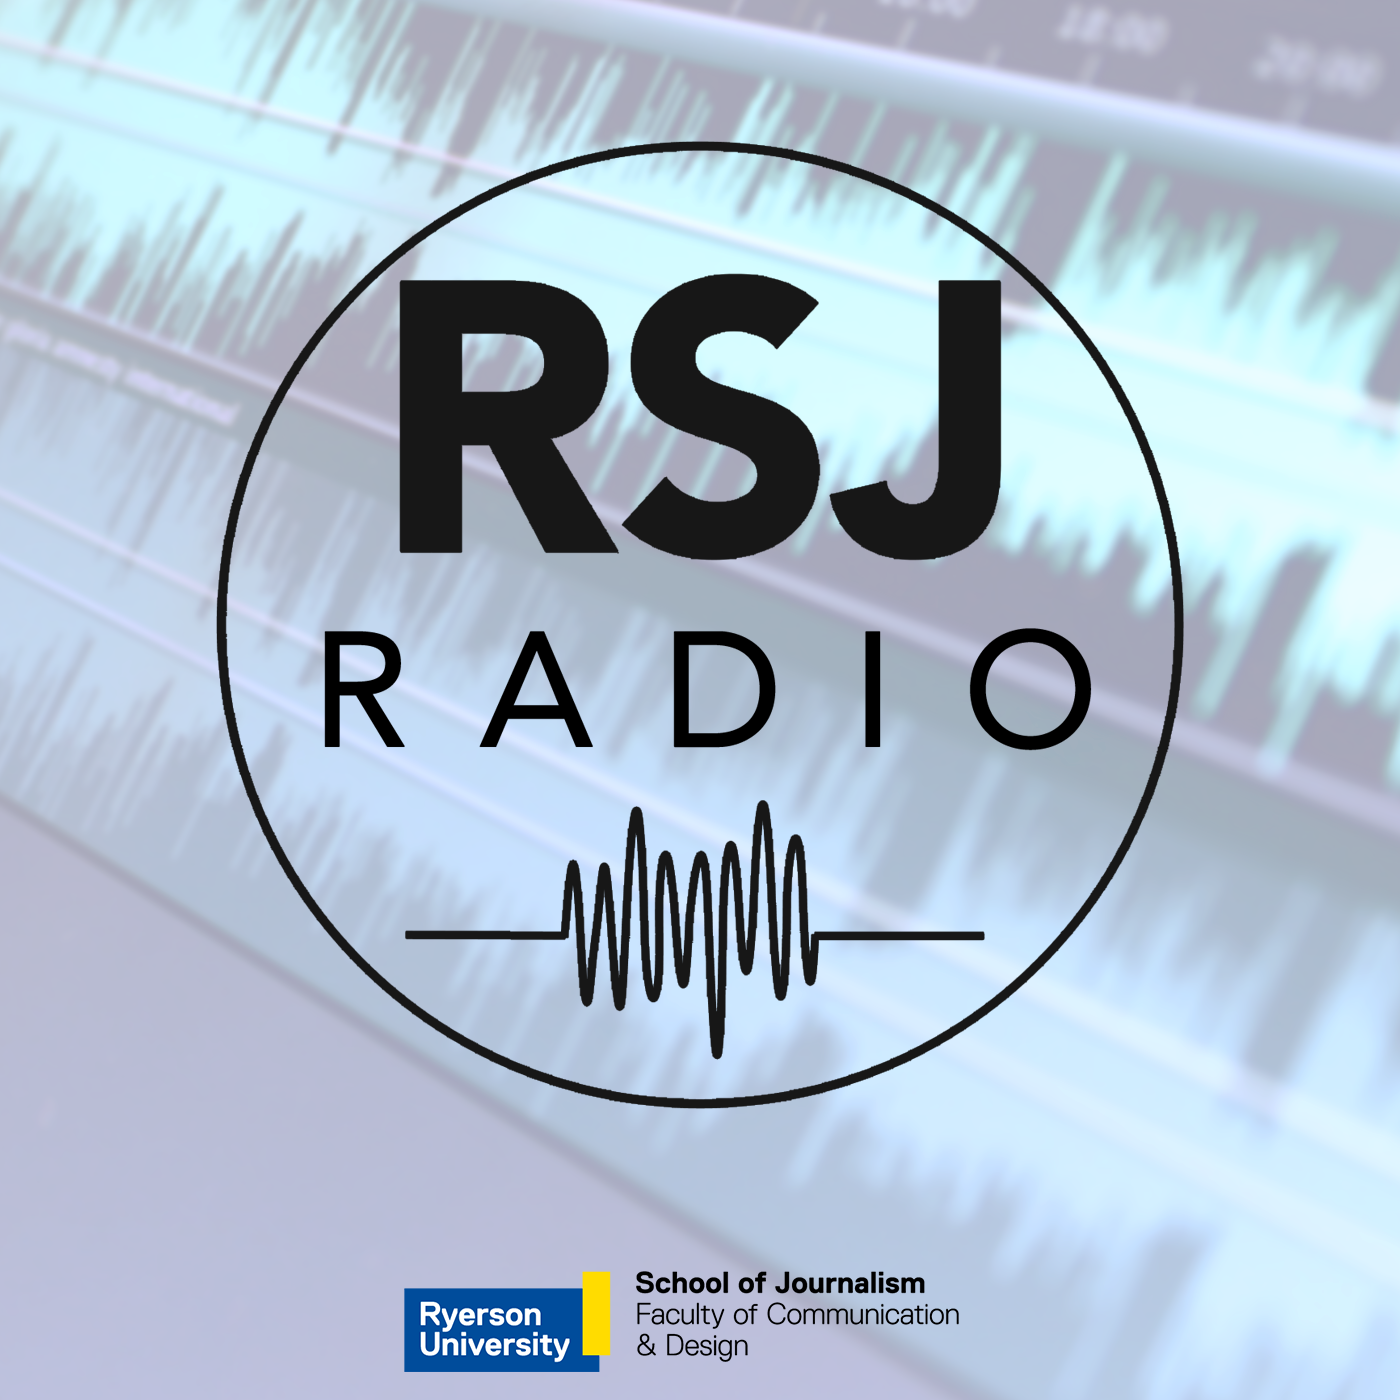 Sound waves with "RSJ Radio" logo in a circle on top.